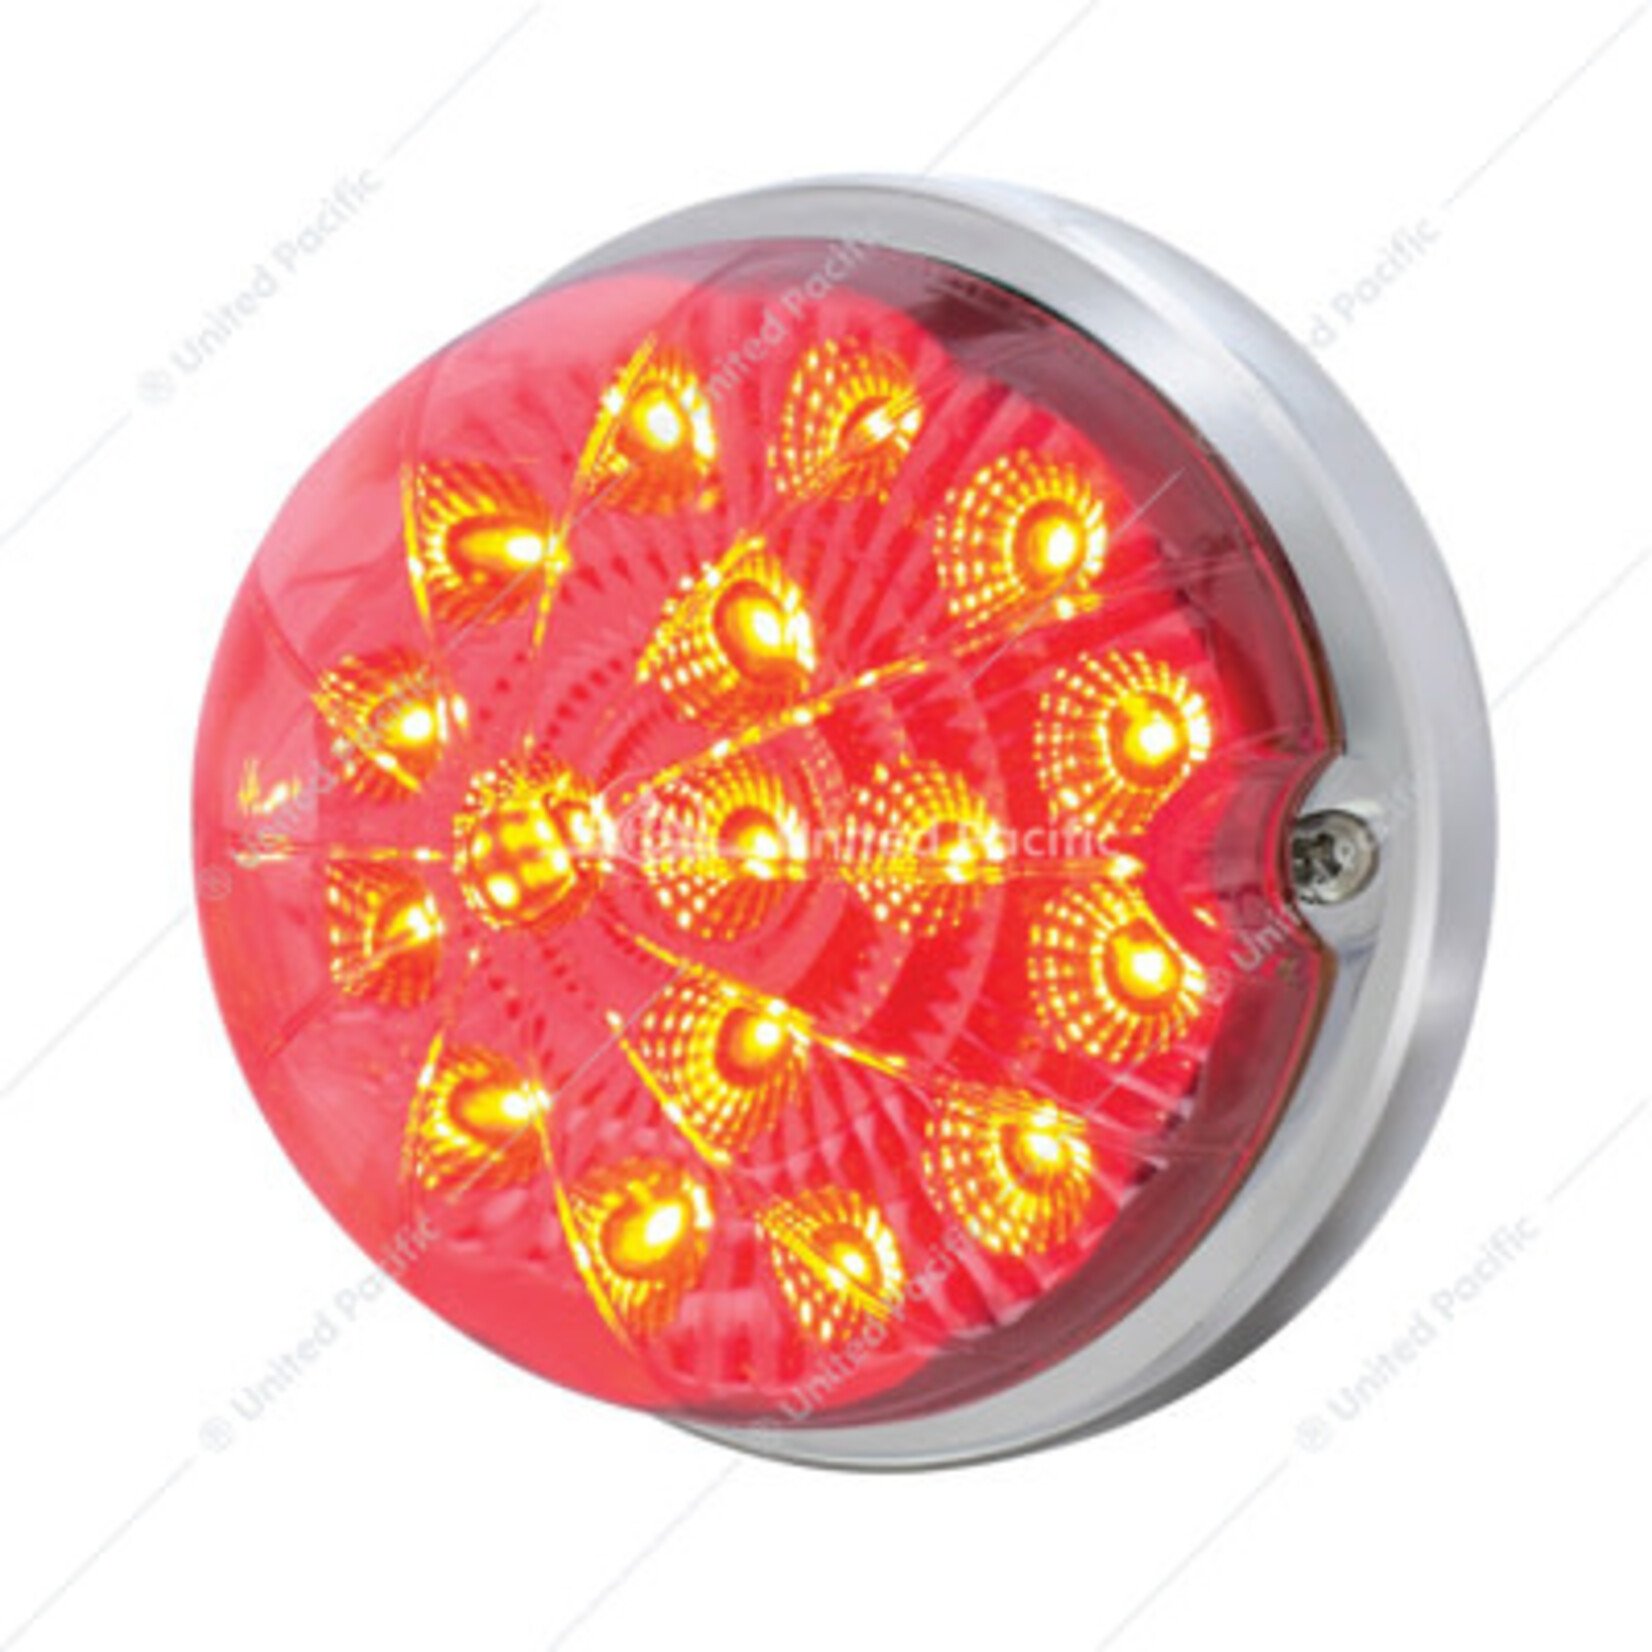 17 LED Dual Function Watermelon Clear Reflector Flush Mount Kit With Low Profile Bezel-Red LED/Clear Lens